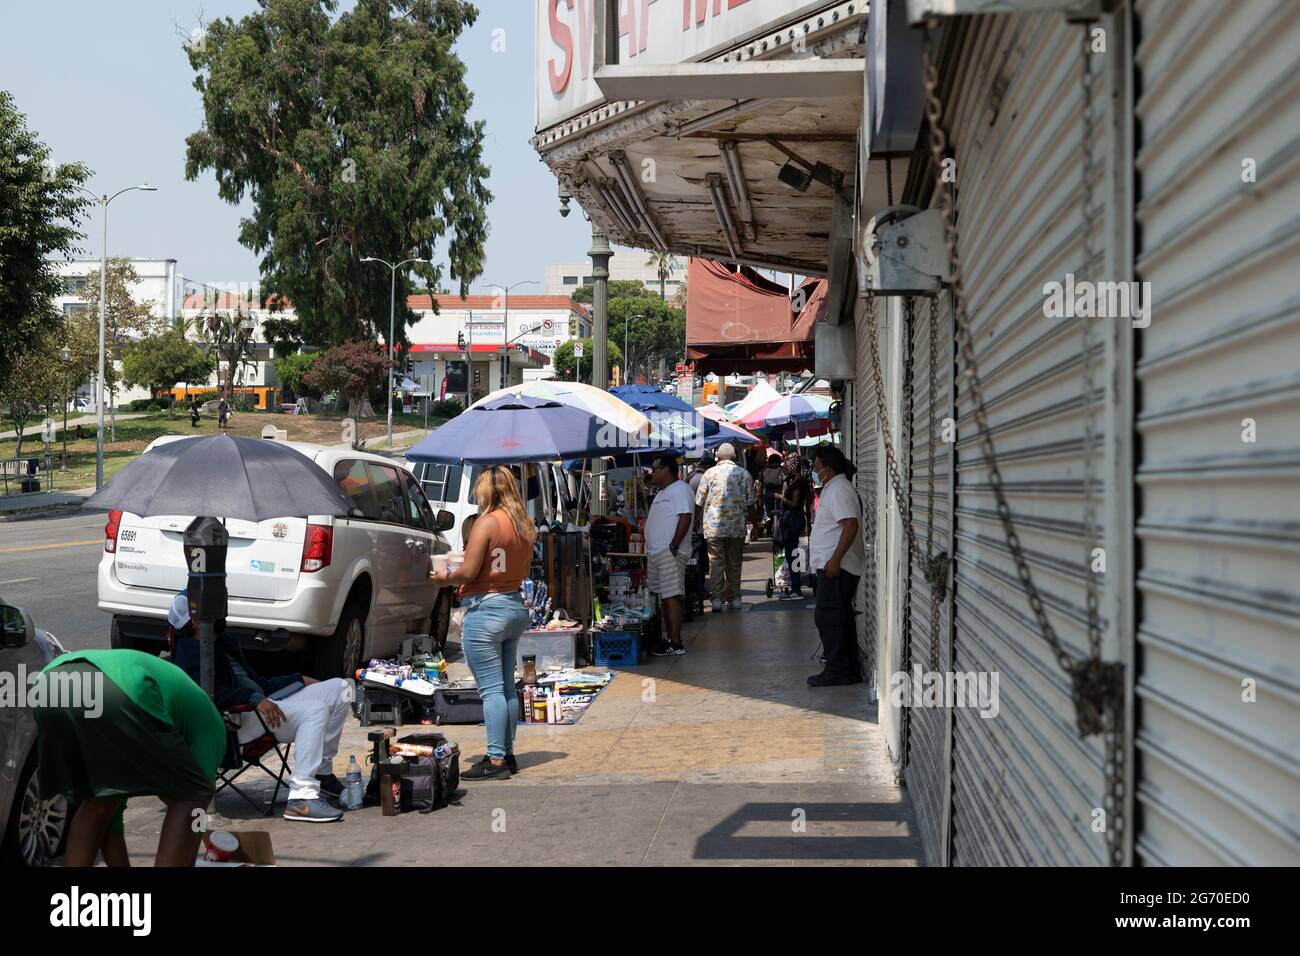 Los Angeles, CA USA - August 20, 2020: Street vendors operate in front of closed retail businesses during the coronavirus pandemic lockdowns Stock Photo